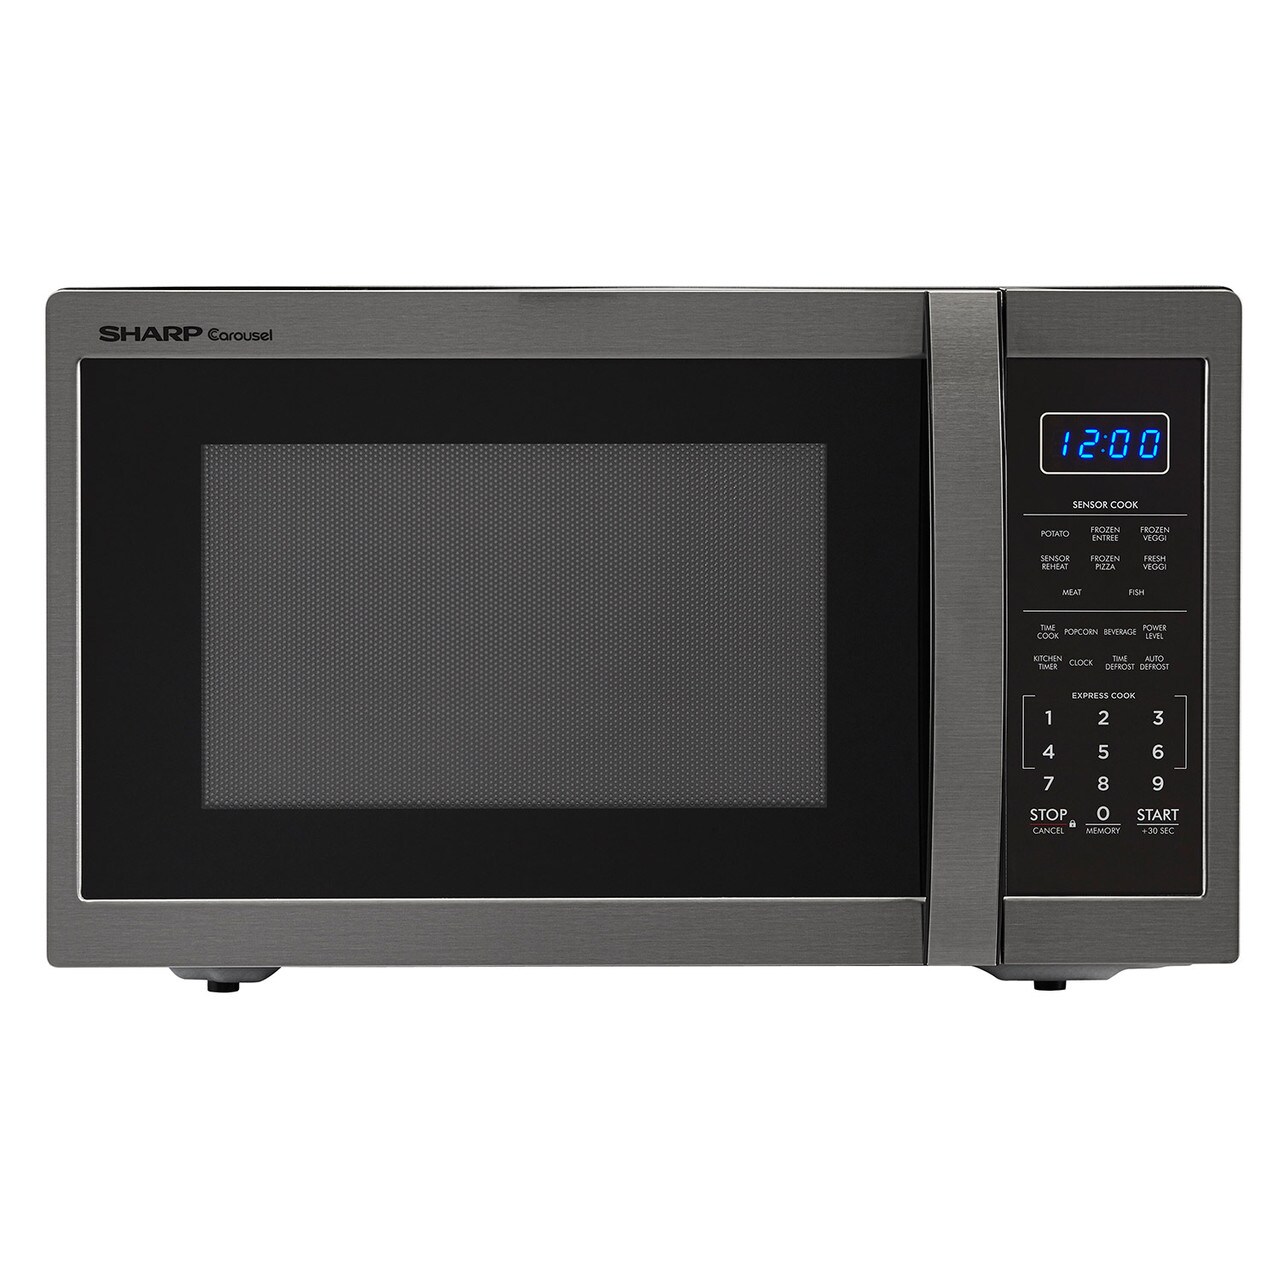 Sharp Countertop Microwaves At Lowes